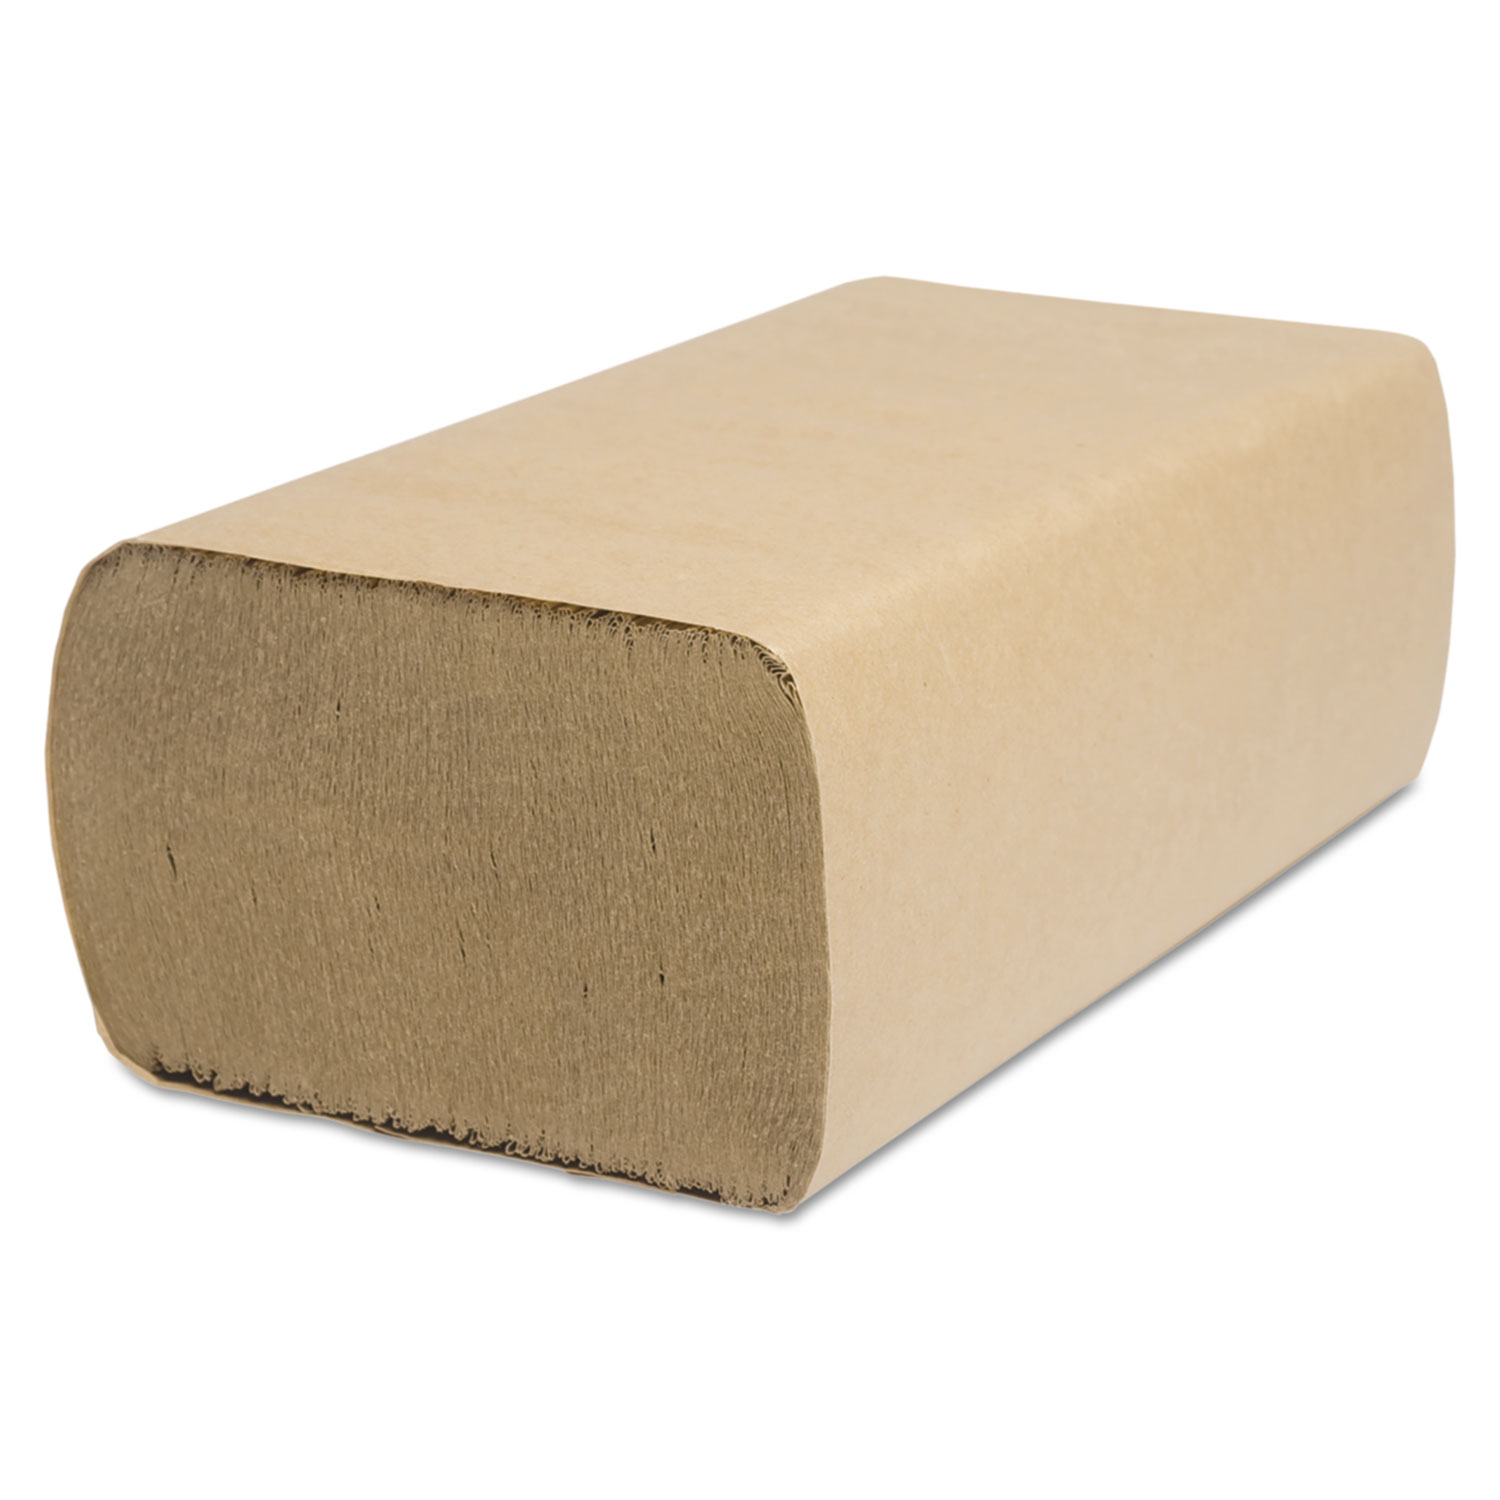  Cascades PRO H175 Select Folded Towel, Multifold, Natural, 9 x 9.45, 250/Pack, 4000/Carton (CSDH175) 